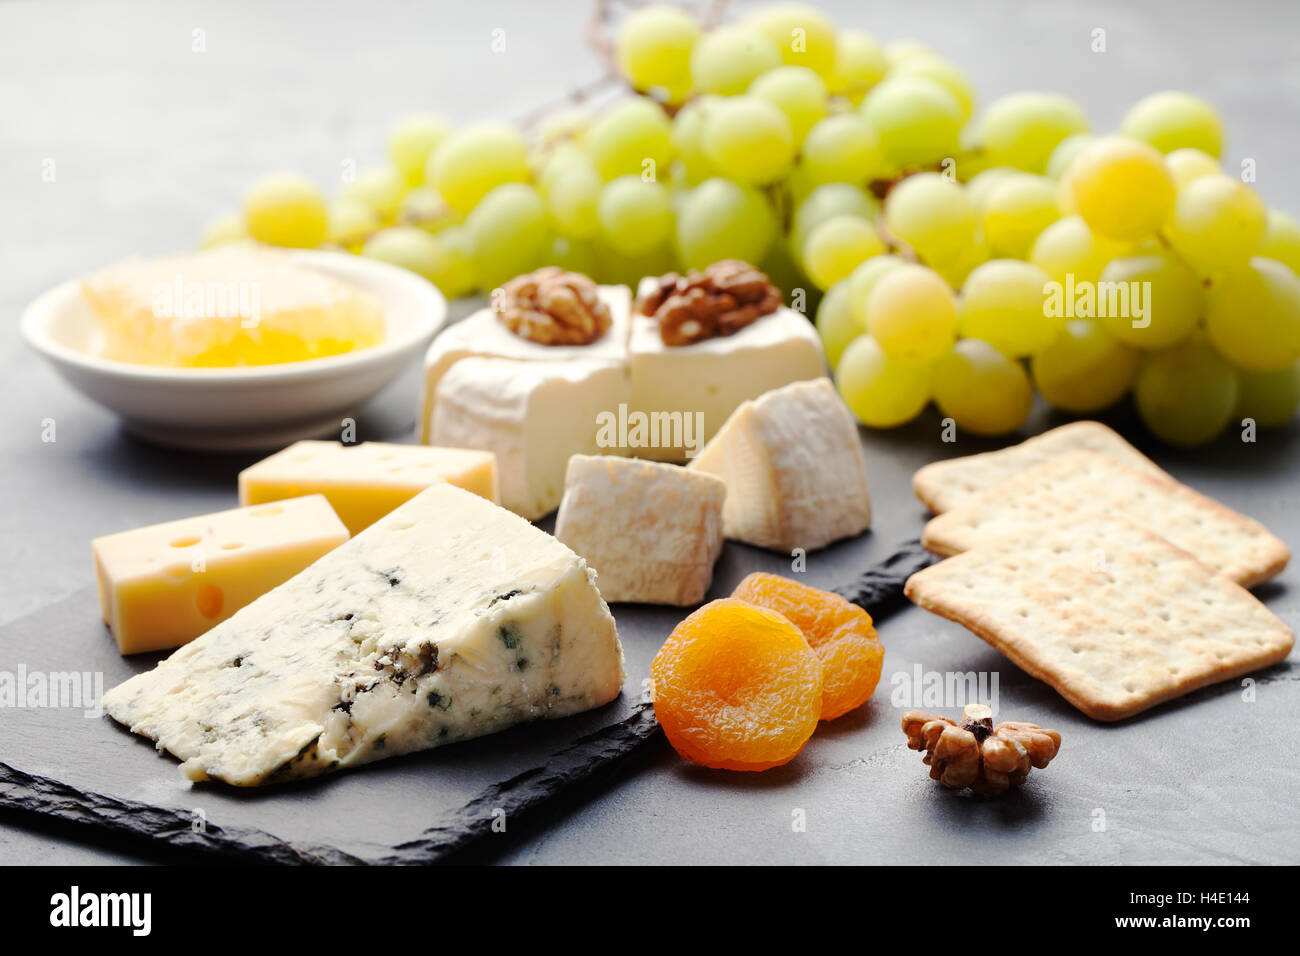 Glass of white wine and assorted cheese Stock Photo